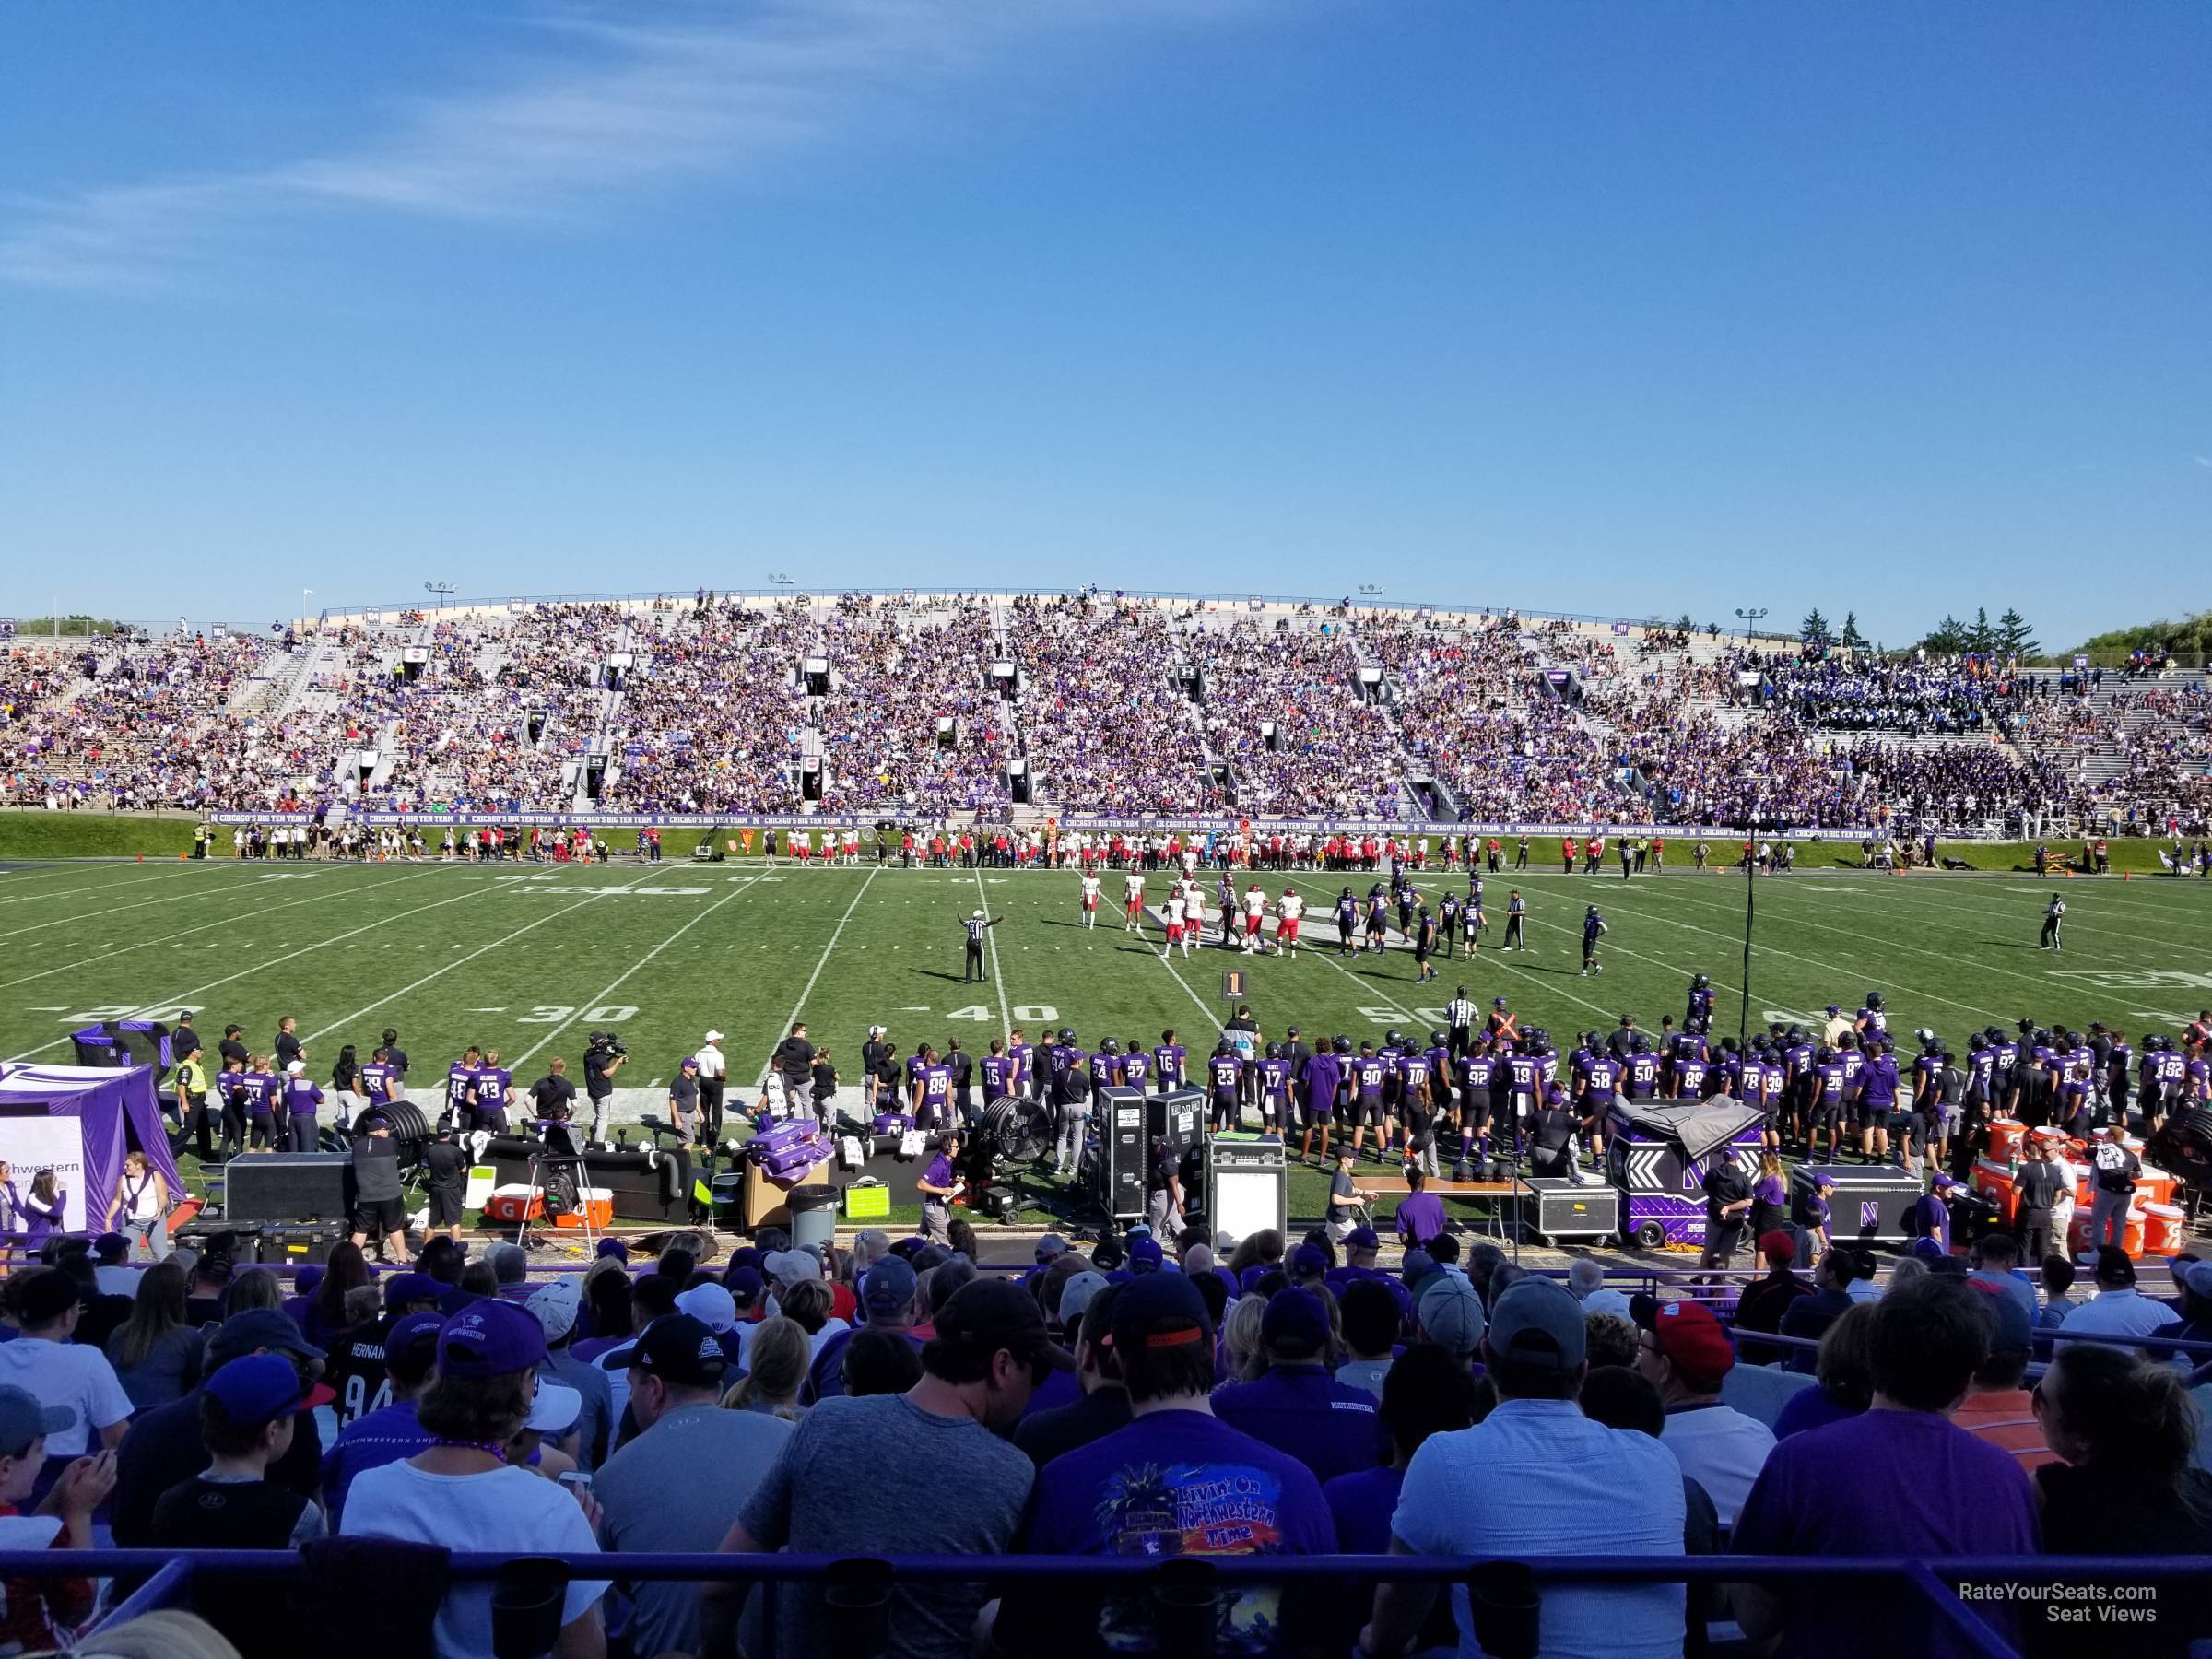 section 130, row 23 seat view  - ryan field